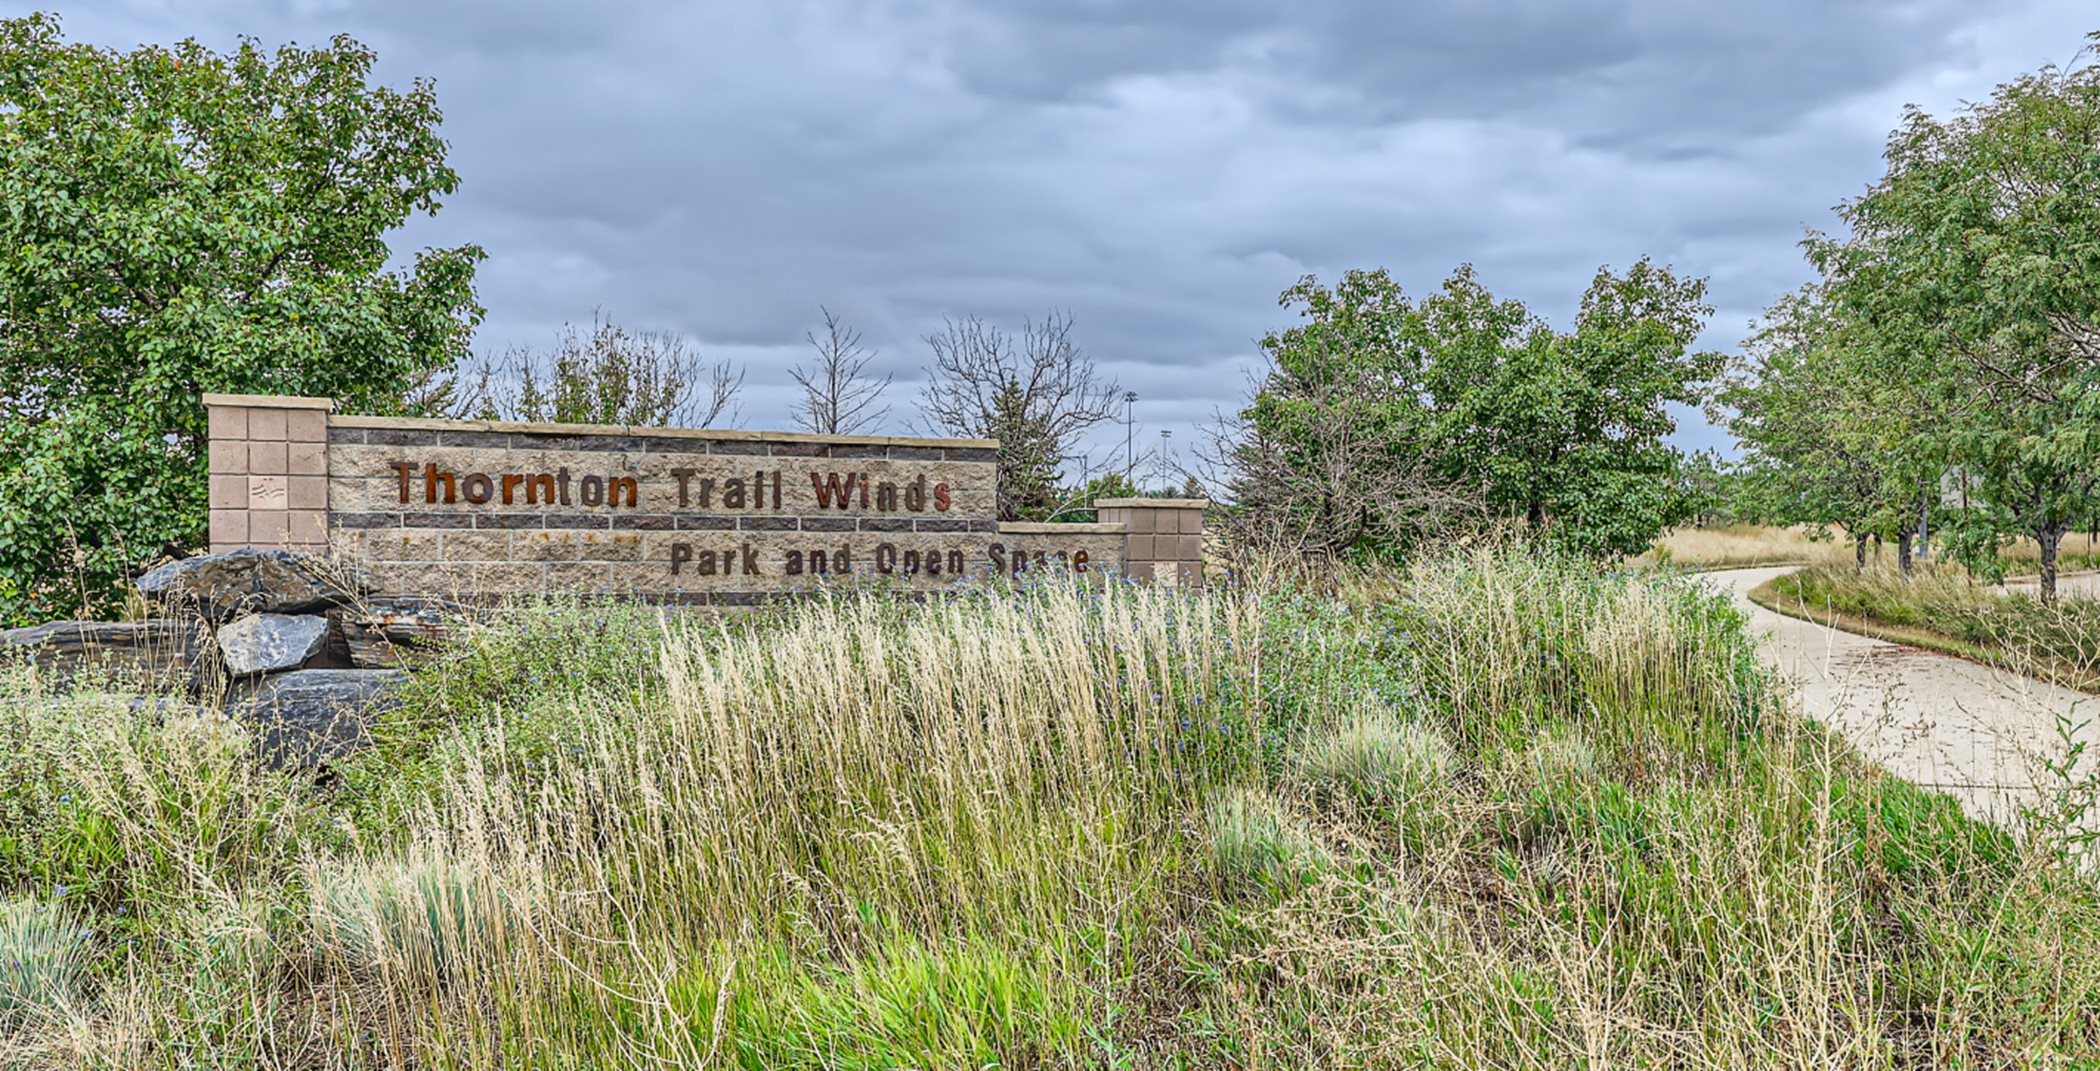 Thornton Trail Winds Park and Open Space 